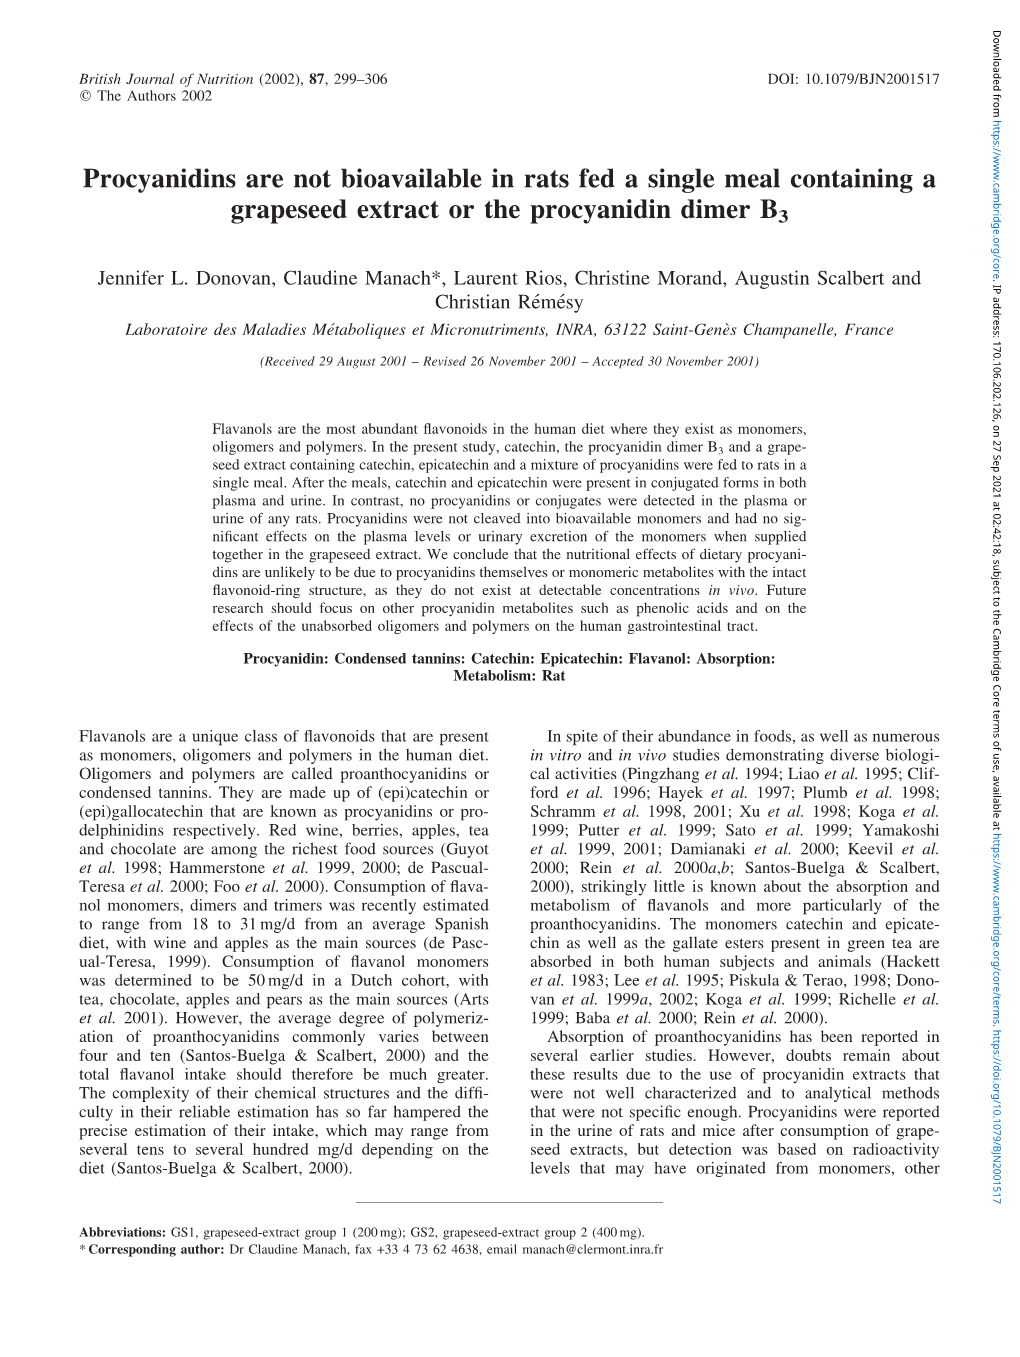 Procyanidins Are Not Bioavailable in Rats Fed a Single Meal Containing a Grapeseed Extract Or the Procyanidin Dimer B3